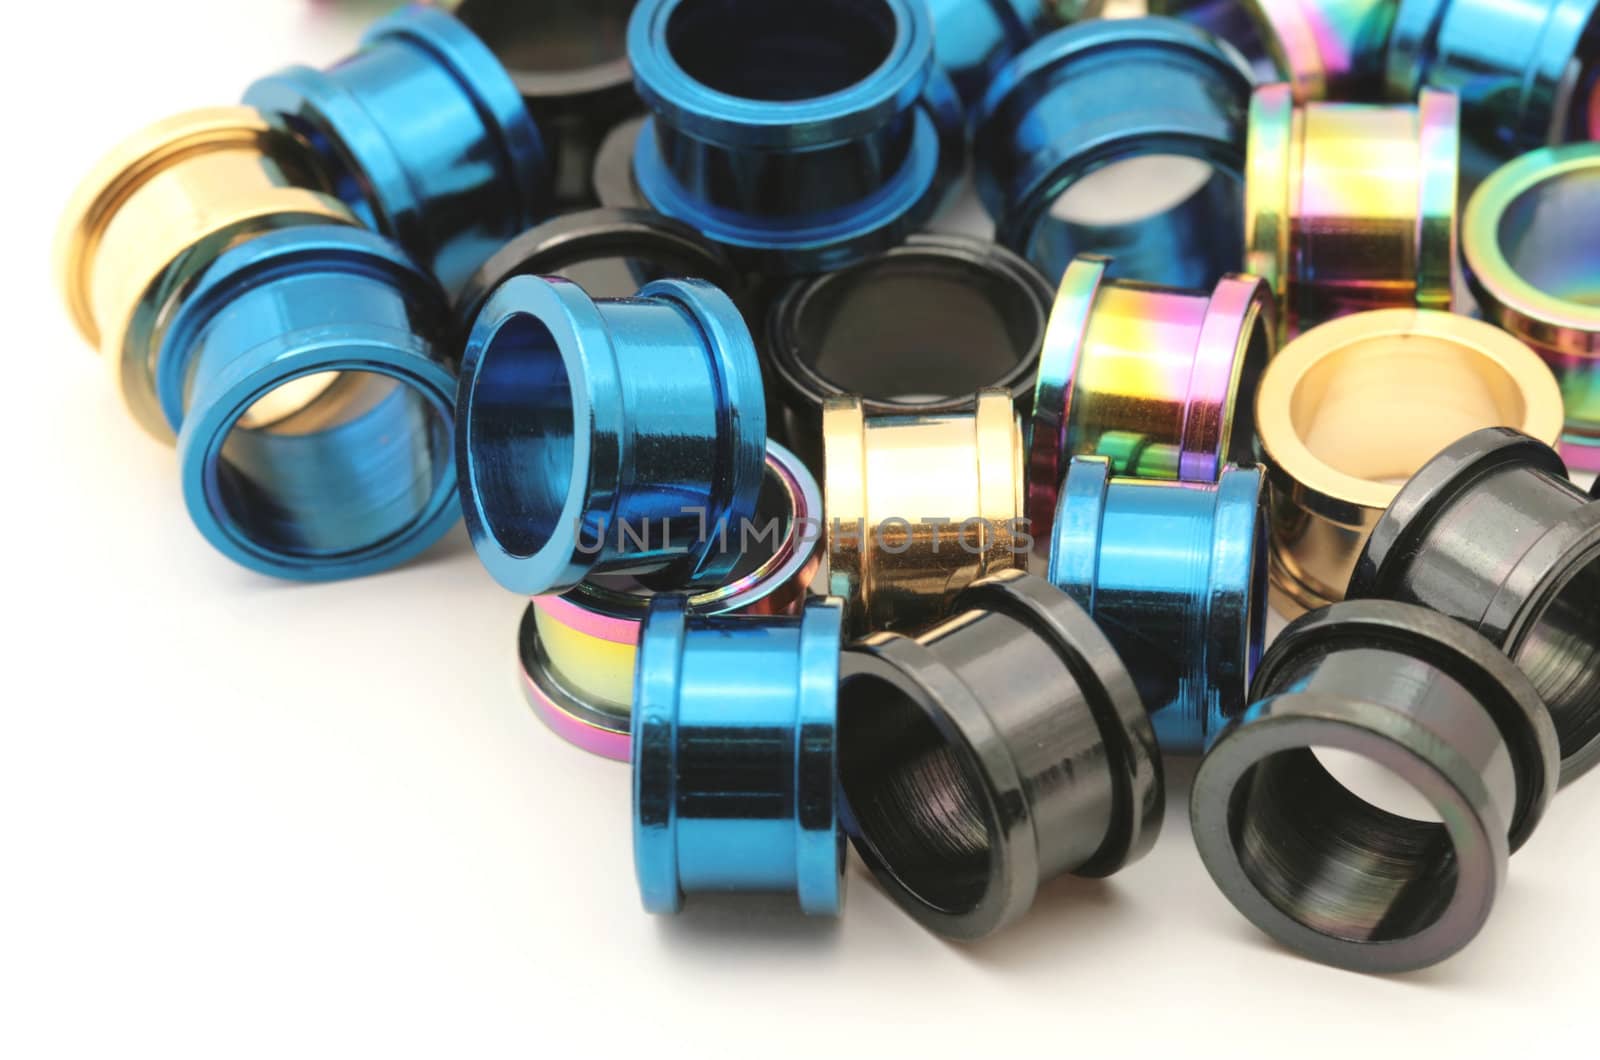 A big pile of colorful titanium screw on flesh tunnels. These are used in stretched ear lobes.